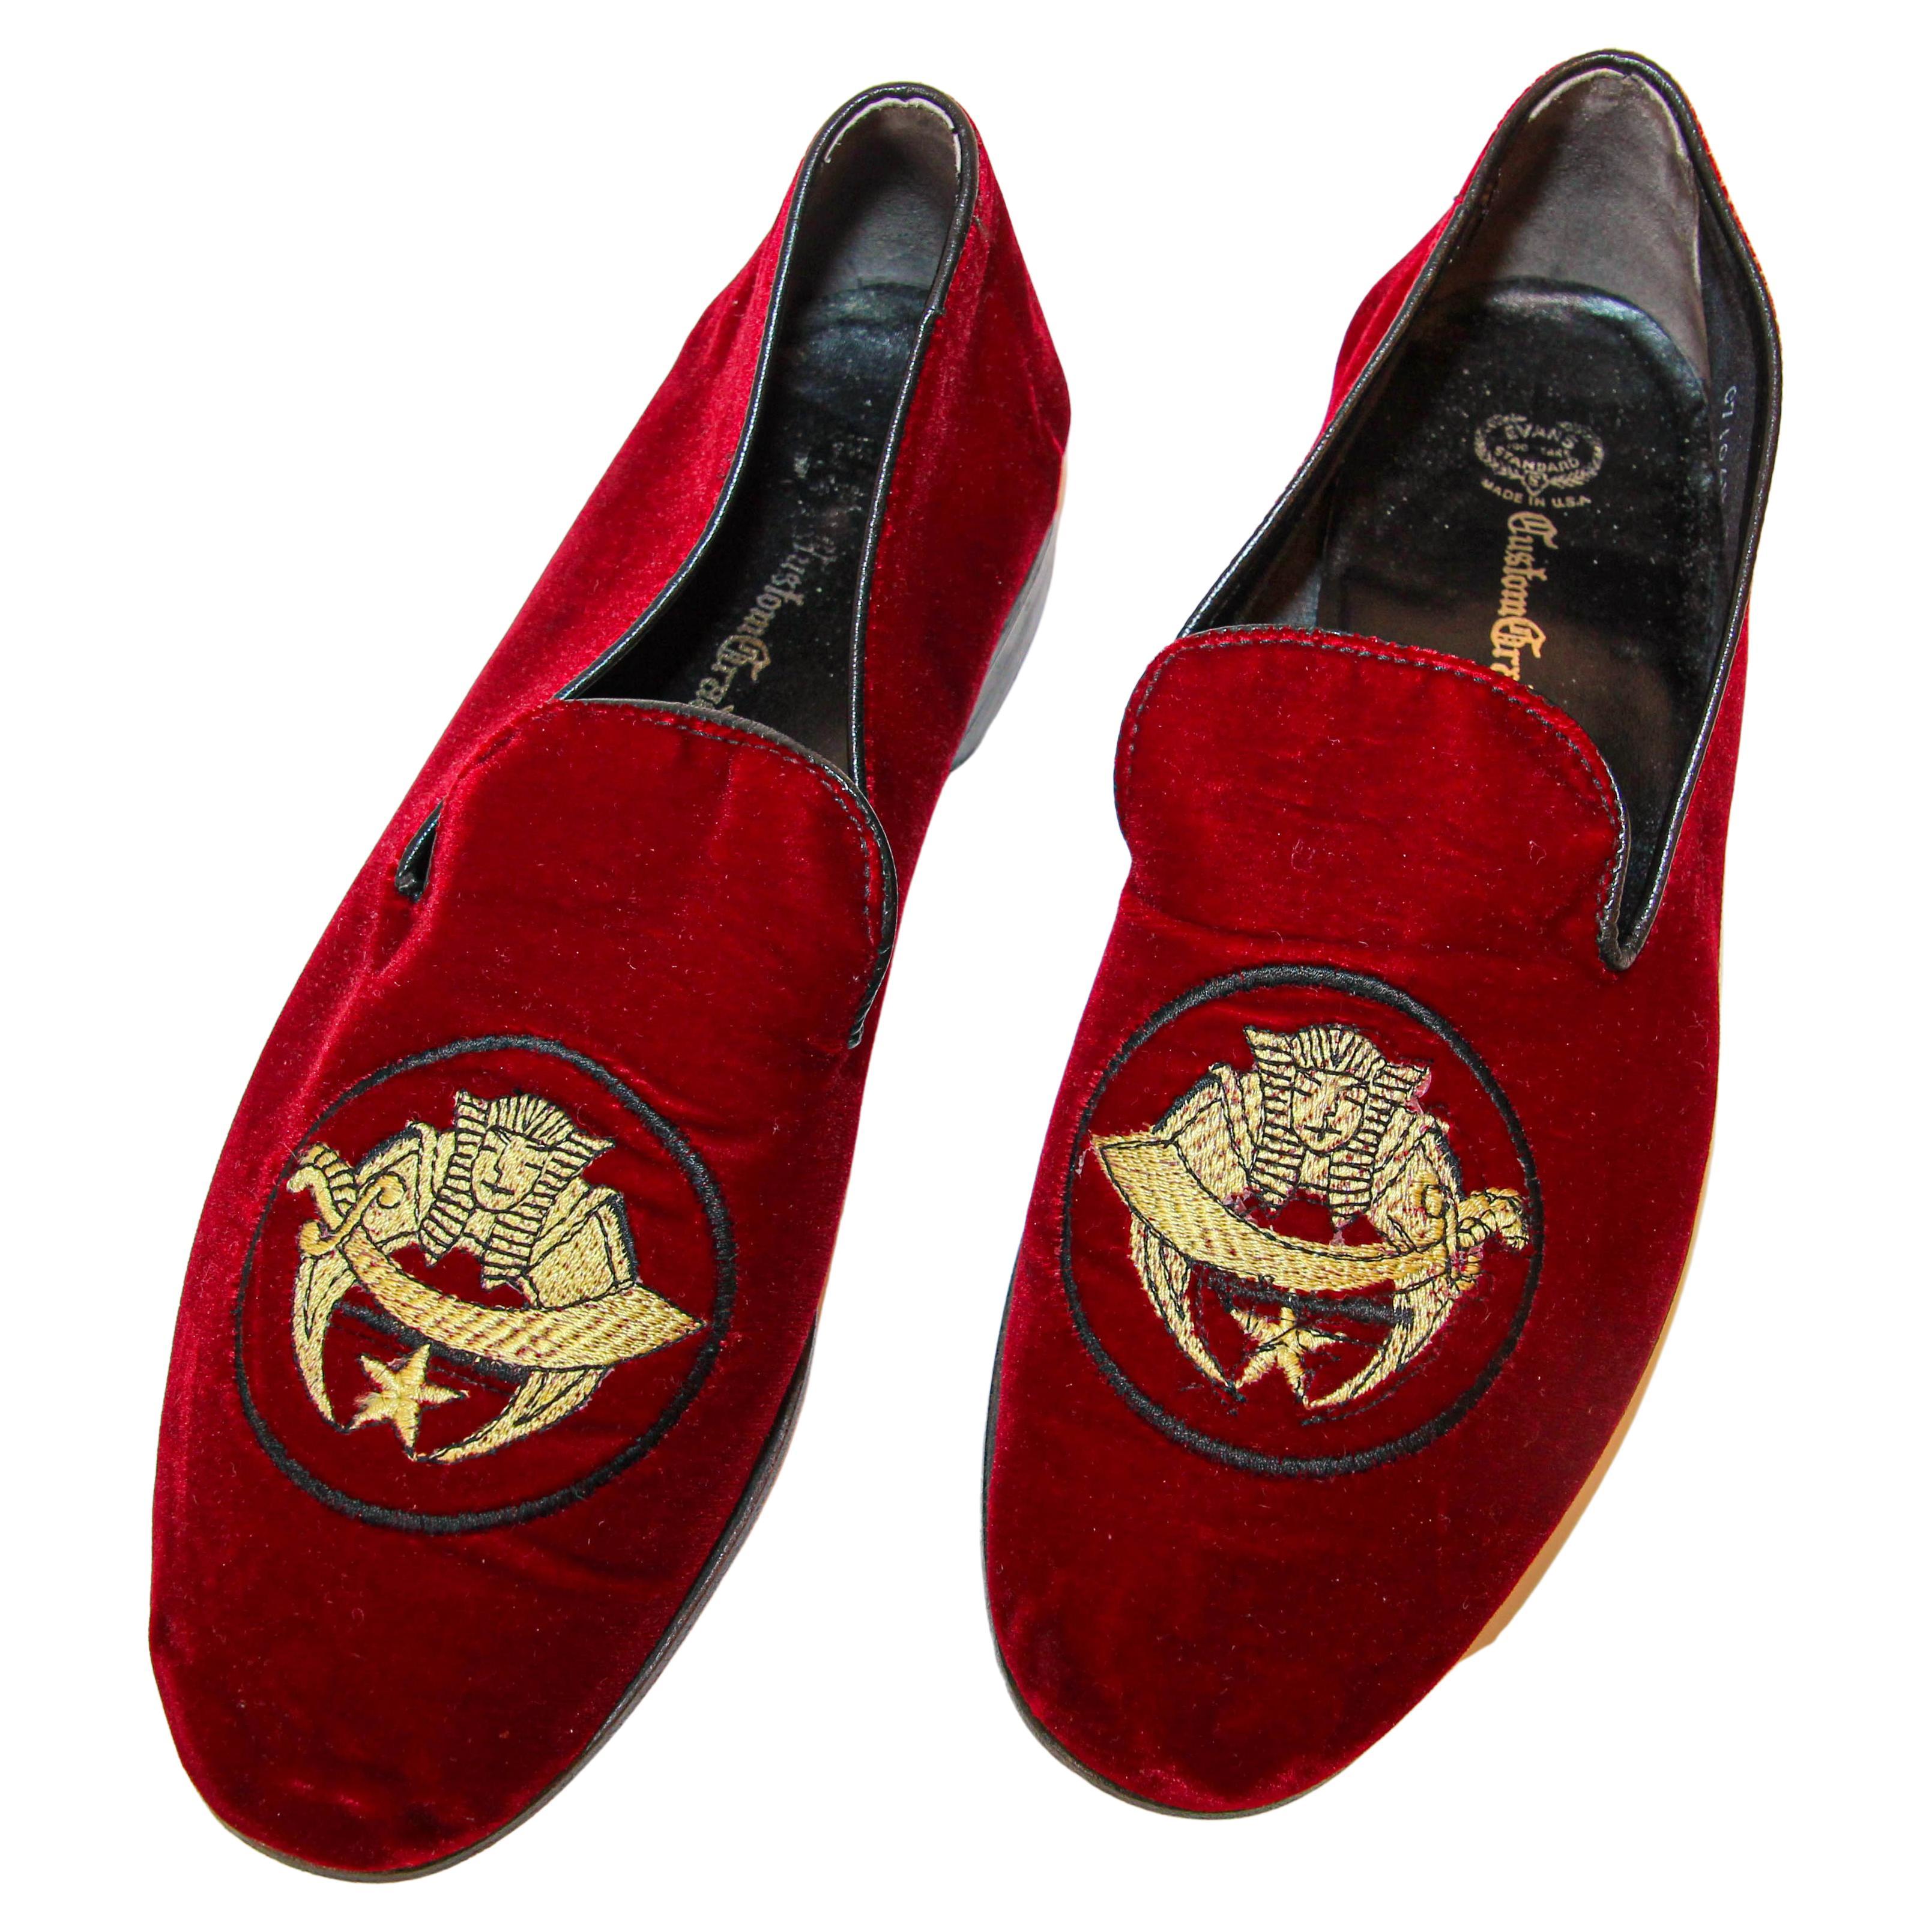 Shriner Red Velvet Shoes Embroidery Loafers Slip On Size 8.5 For Sale